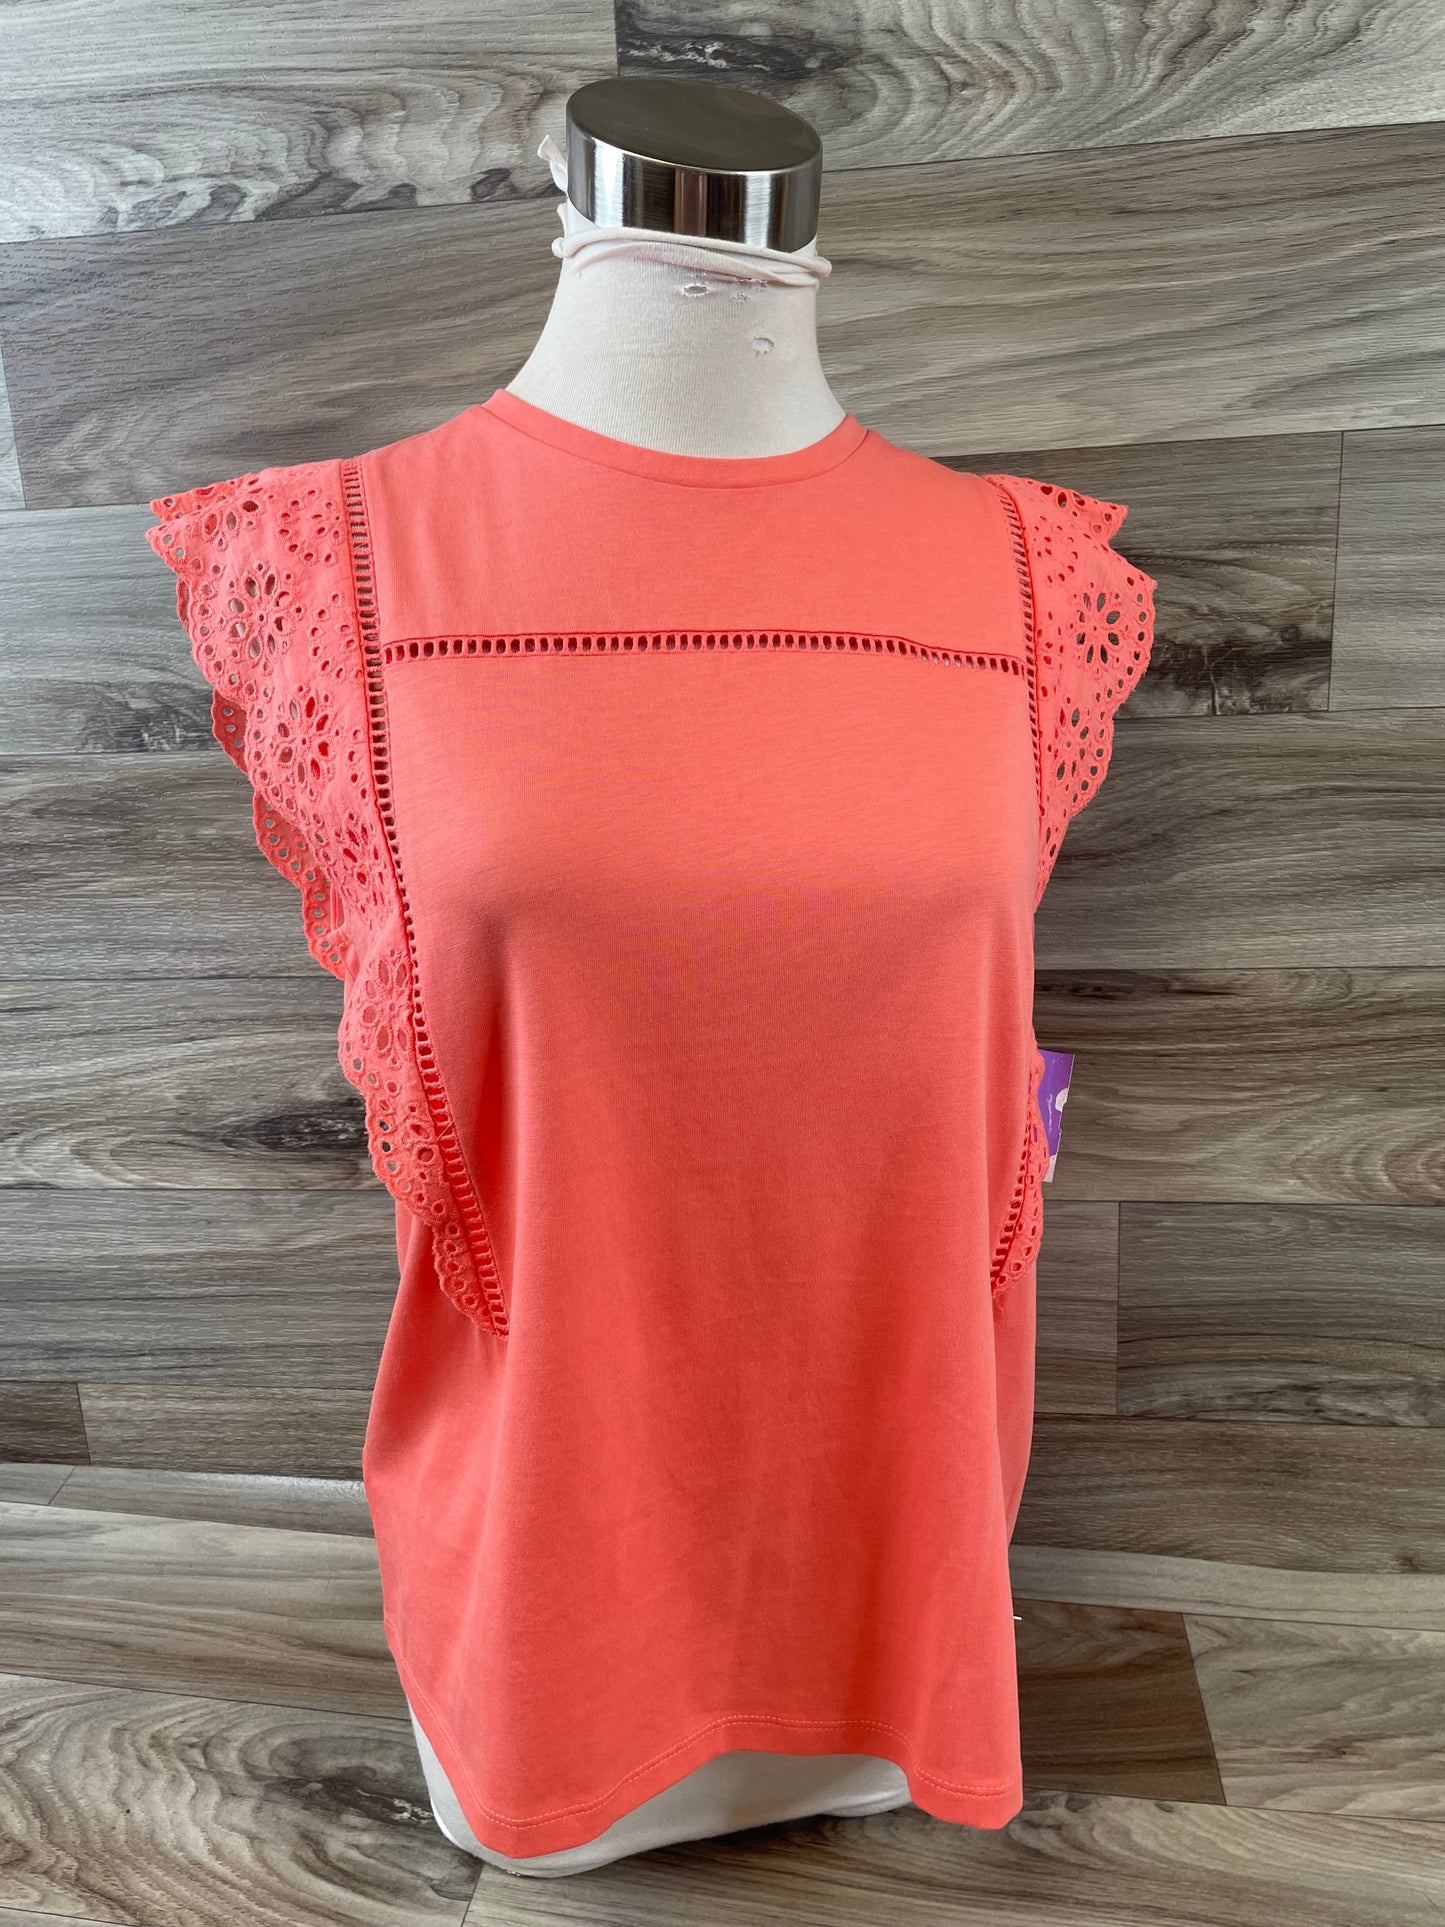 Coral Top Short Sleeve Basic Ann Taylor, Size S